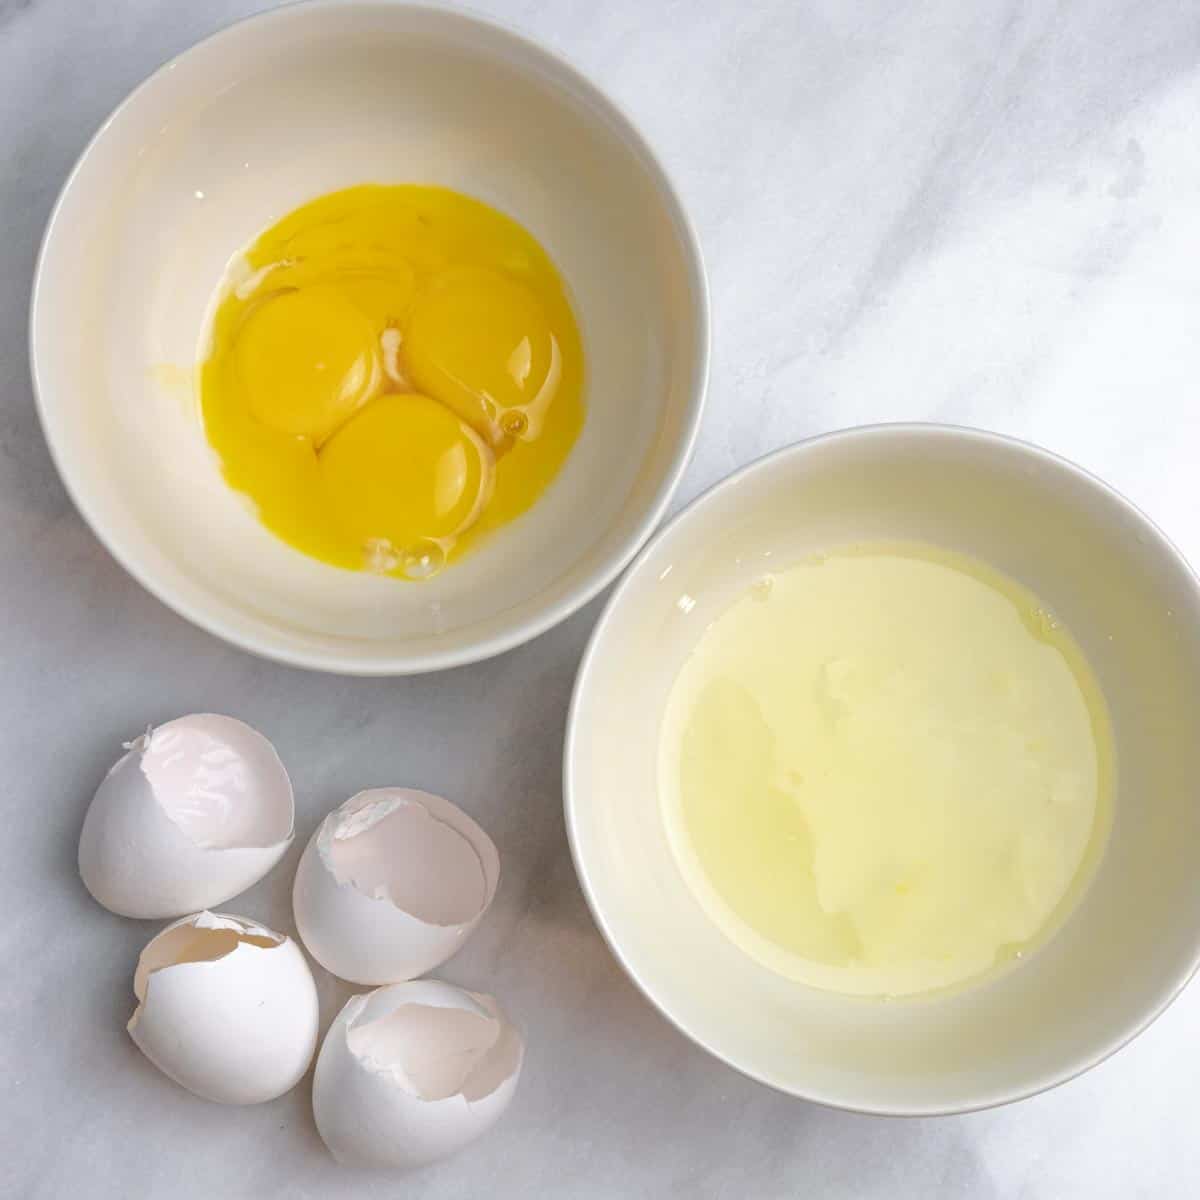 Step showing two bowls with egg whites in one, and yolks in the other.  Cracked egg shells are next to the bowls.